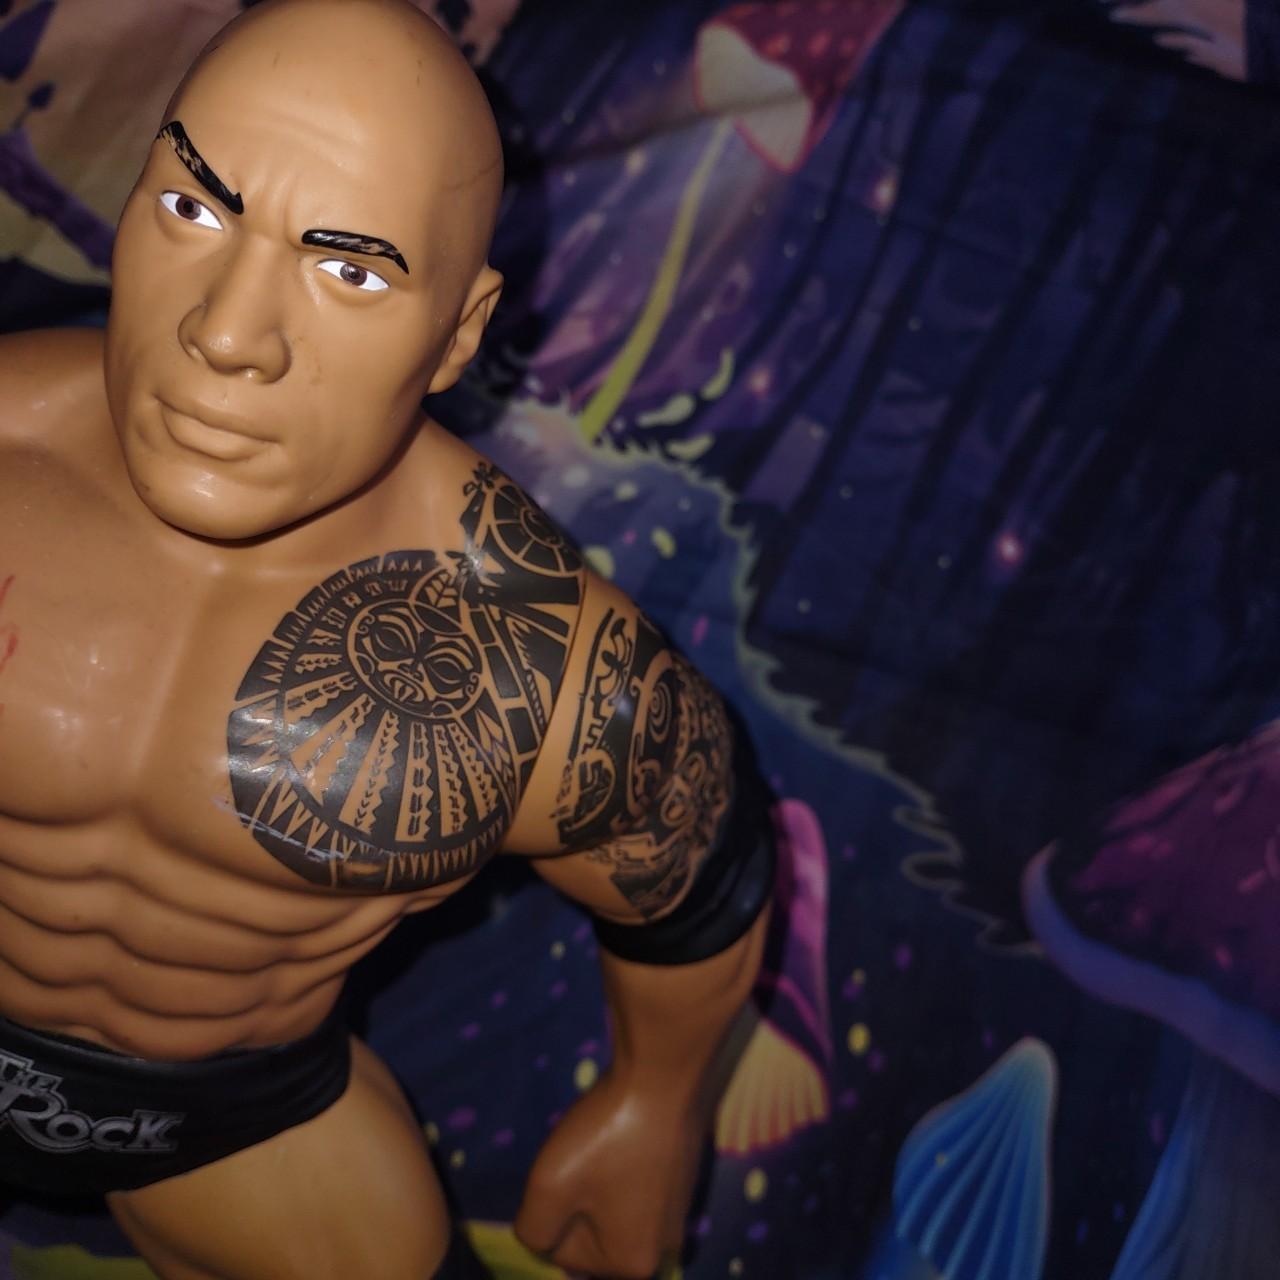 Product Image 3 - The Rock Figure

WWE's Dwayne "The